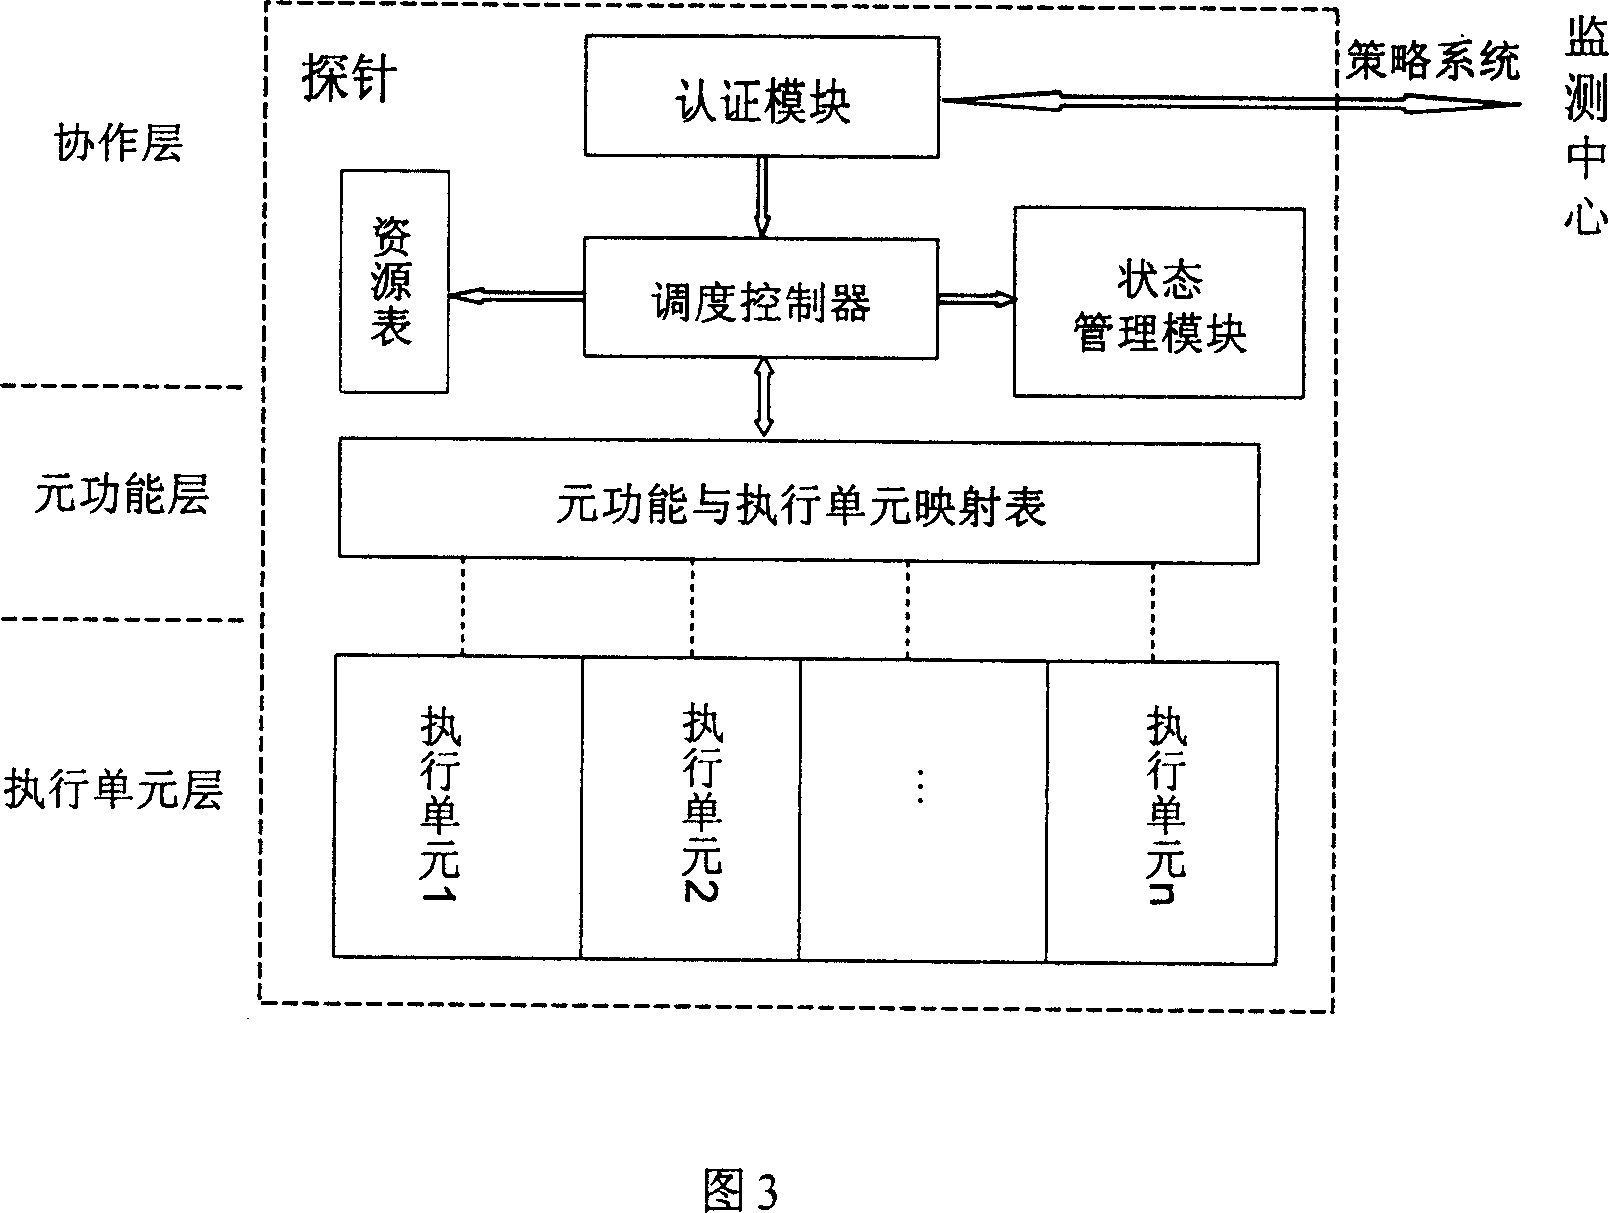 Method and system for testing performance parameter between random two terminal systems in IP network